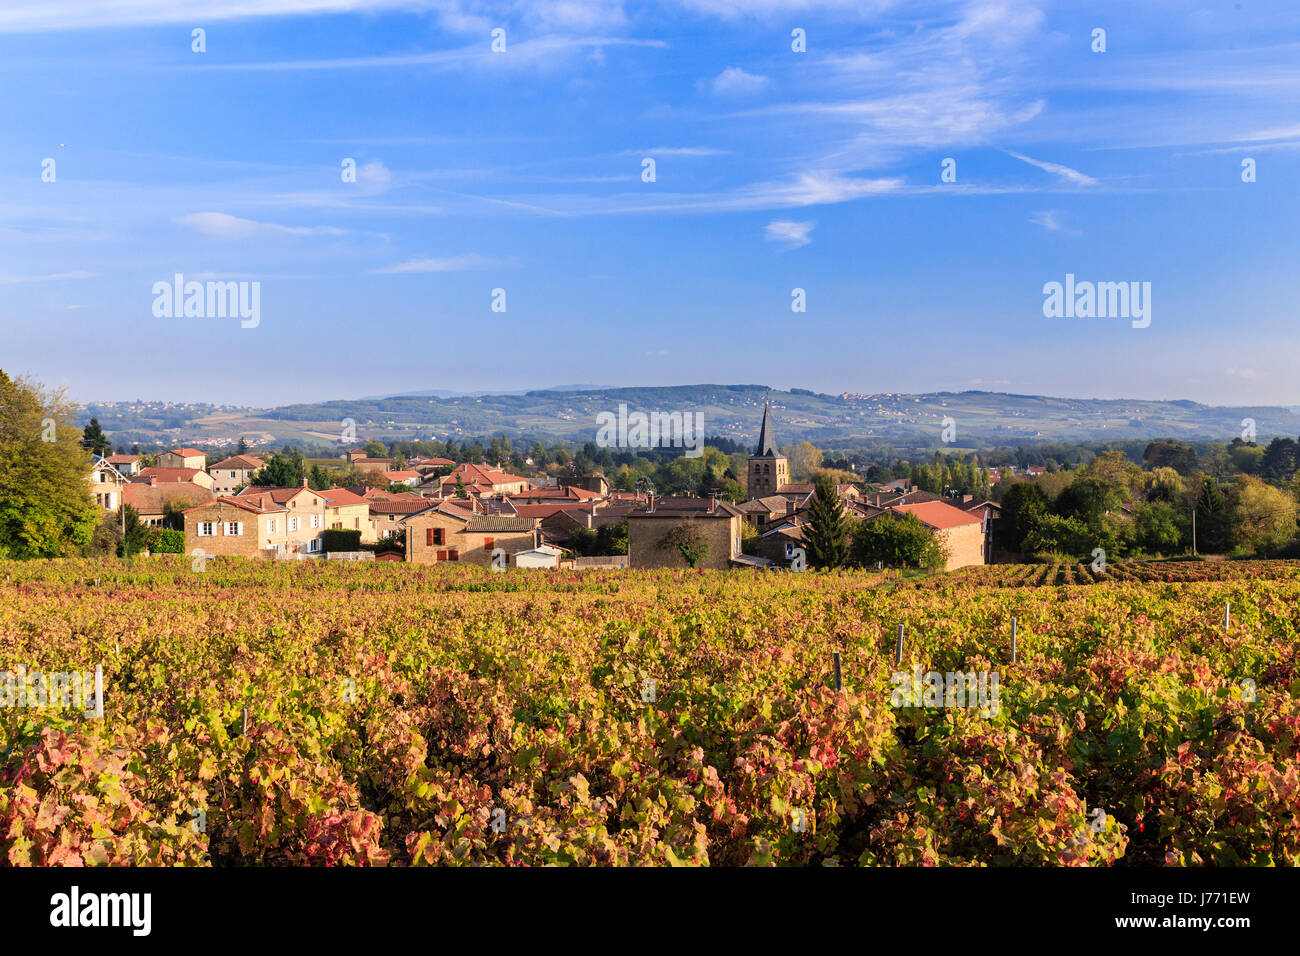 France, Rhone, Beaujolais region, Frontenas, the village and the vineyards in autumn Stock Photo